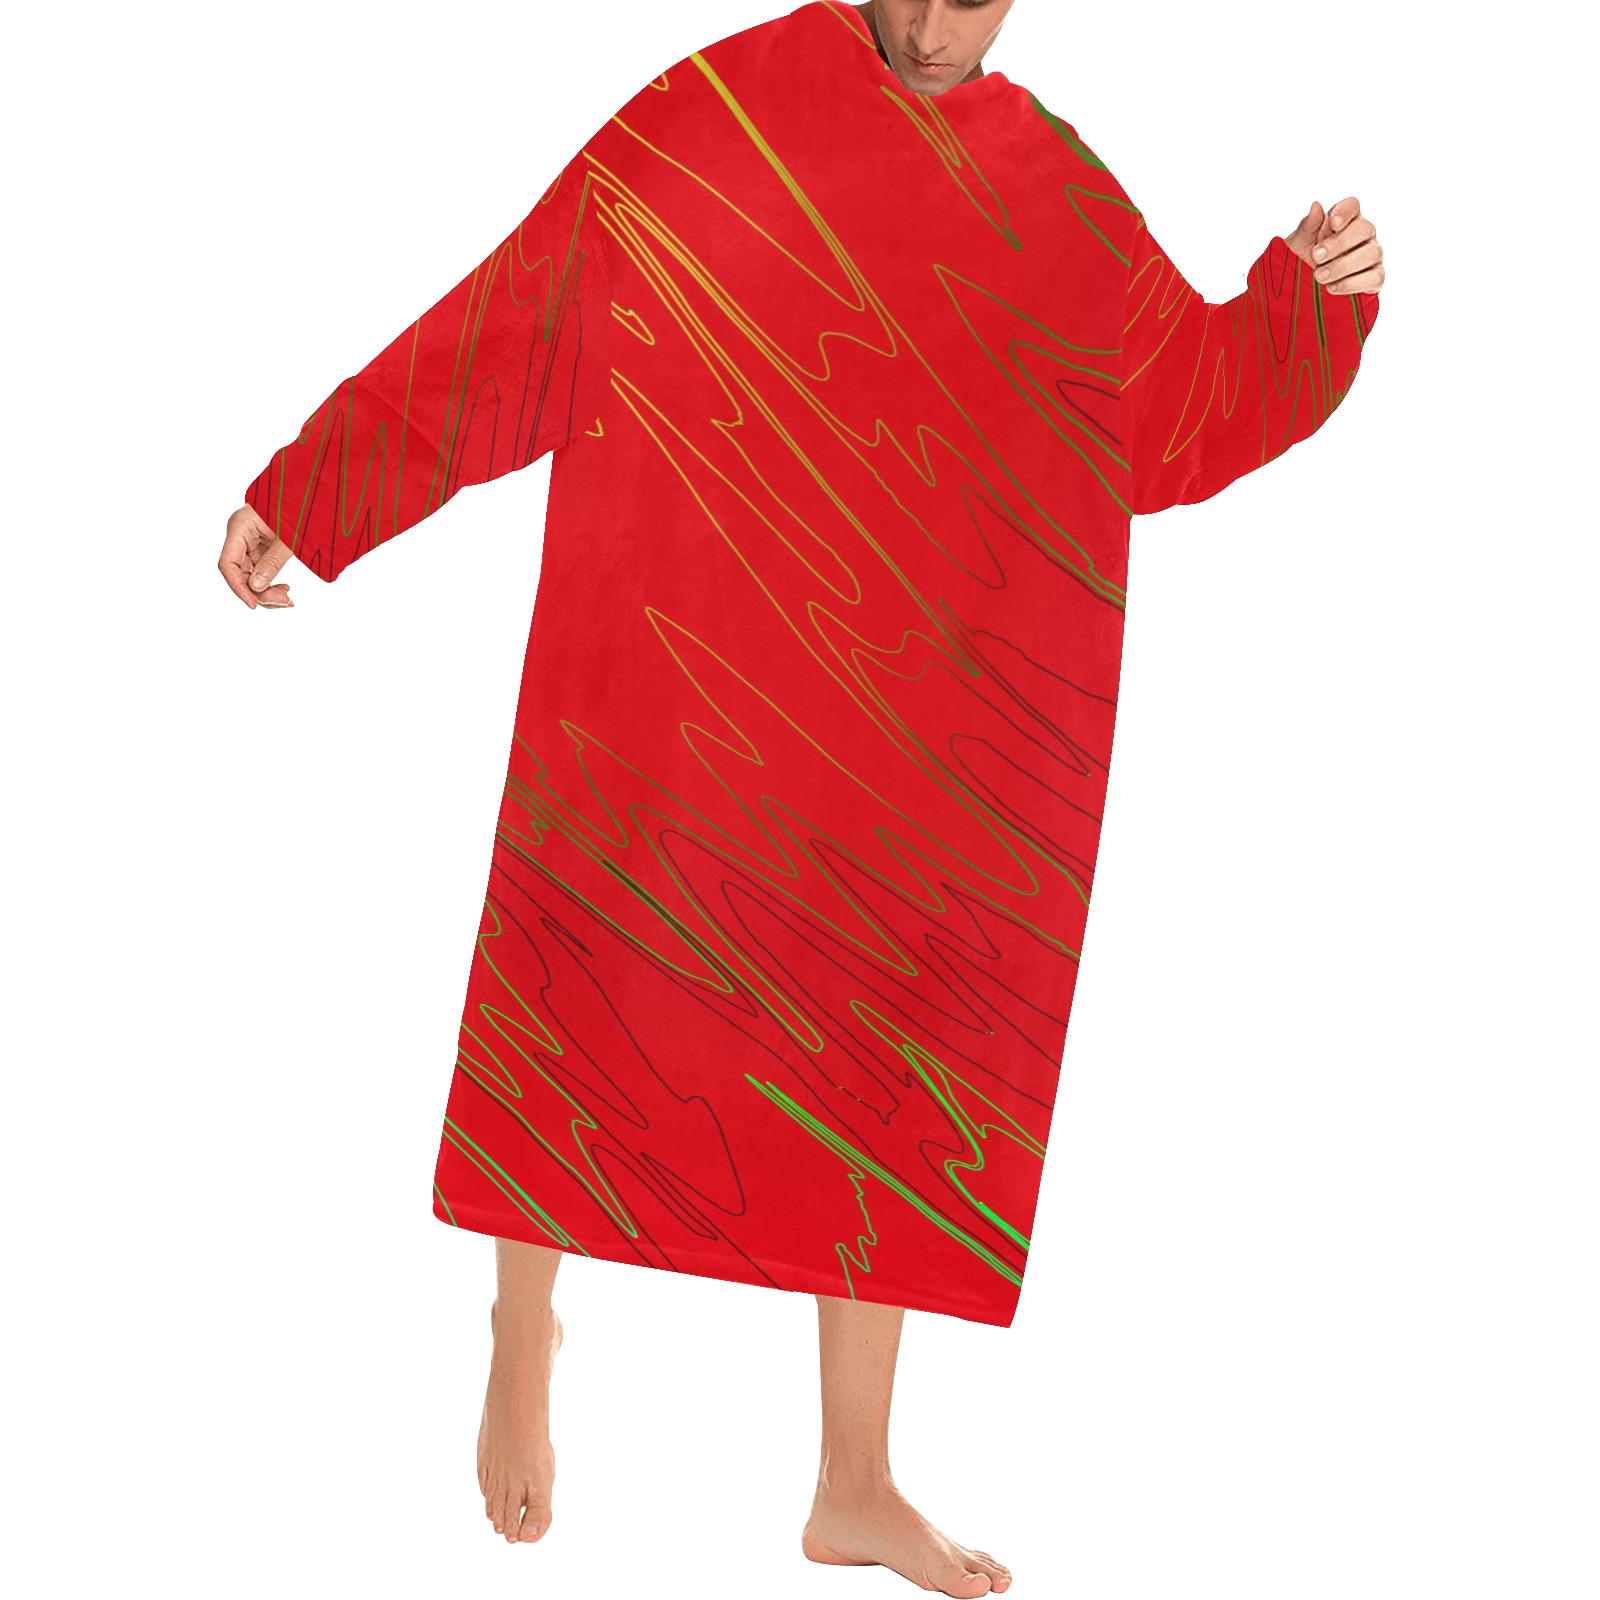 Marbled Red Blanket Robe with Sleeves for Adults